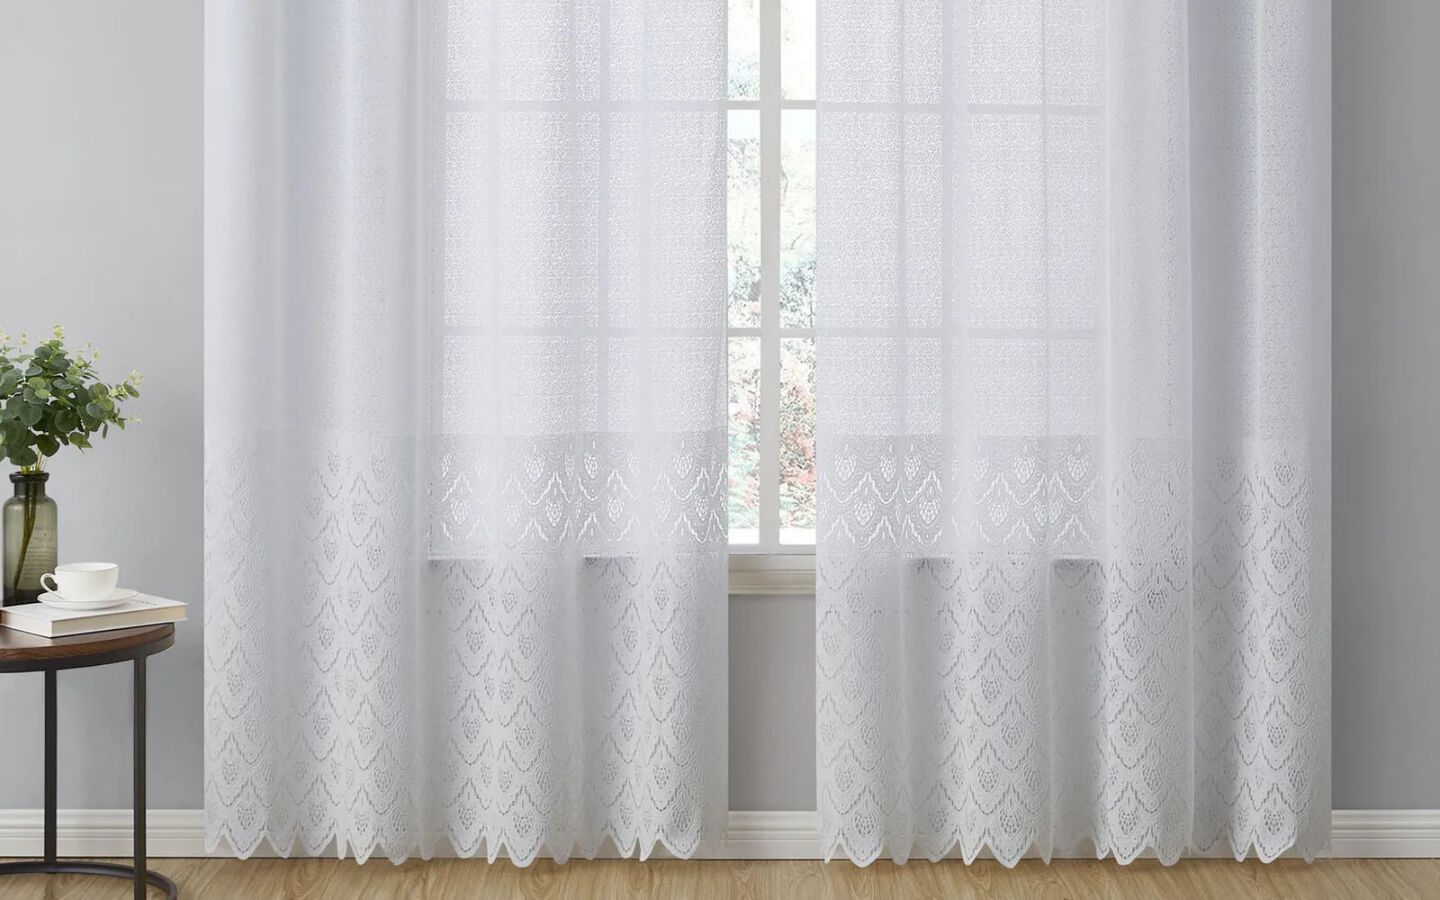 Window with white pain framed by long, white lace curtains